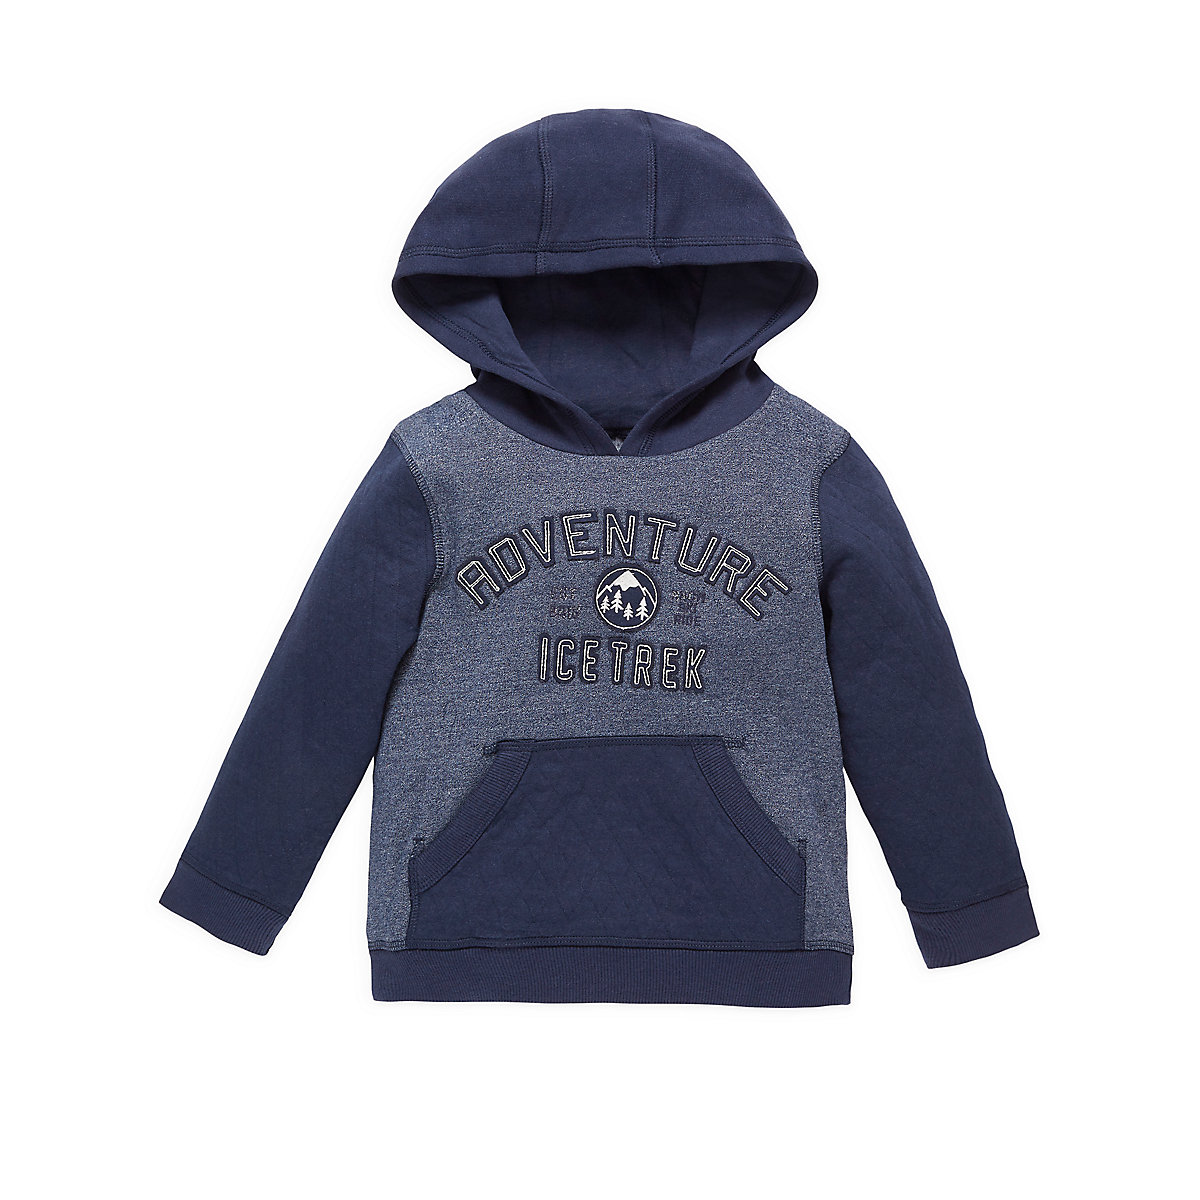 Mothercare Blue and Navy Hoodie Review